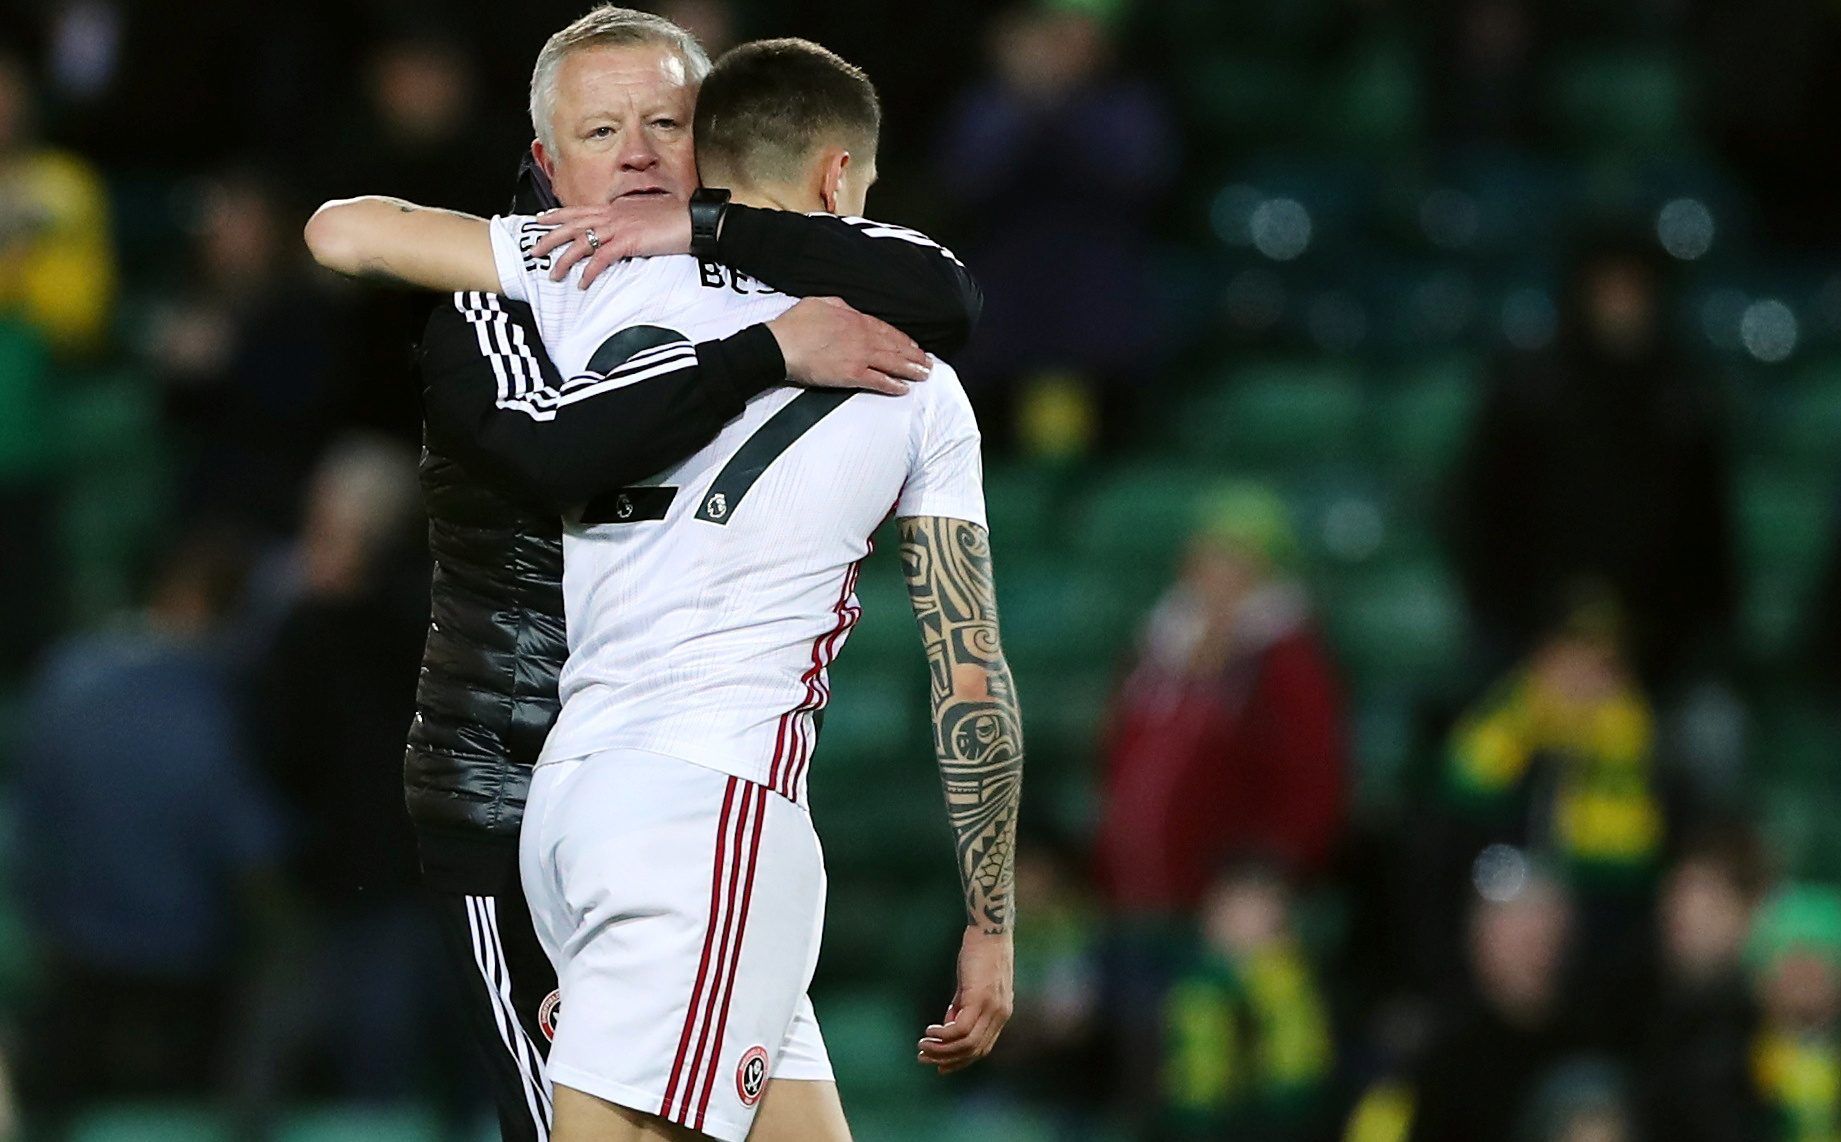 Soccer Football - Premier League - Norwich City v Sheffield United - Carrow Road, Norwich, Britain - December 8, 2019   Sheffield United manager Chris Wilder embraces Muhamed Besic after the match     Action Images via Reuters/Peter Cziborra  EDITORIAL USE ONLY. No use with unauthorized audio, video, data, fixture lists, club/league logos or 